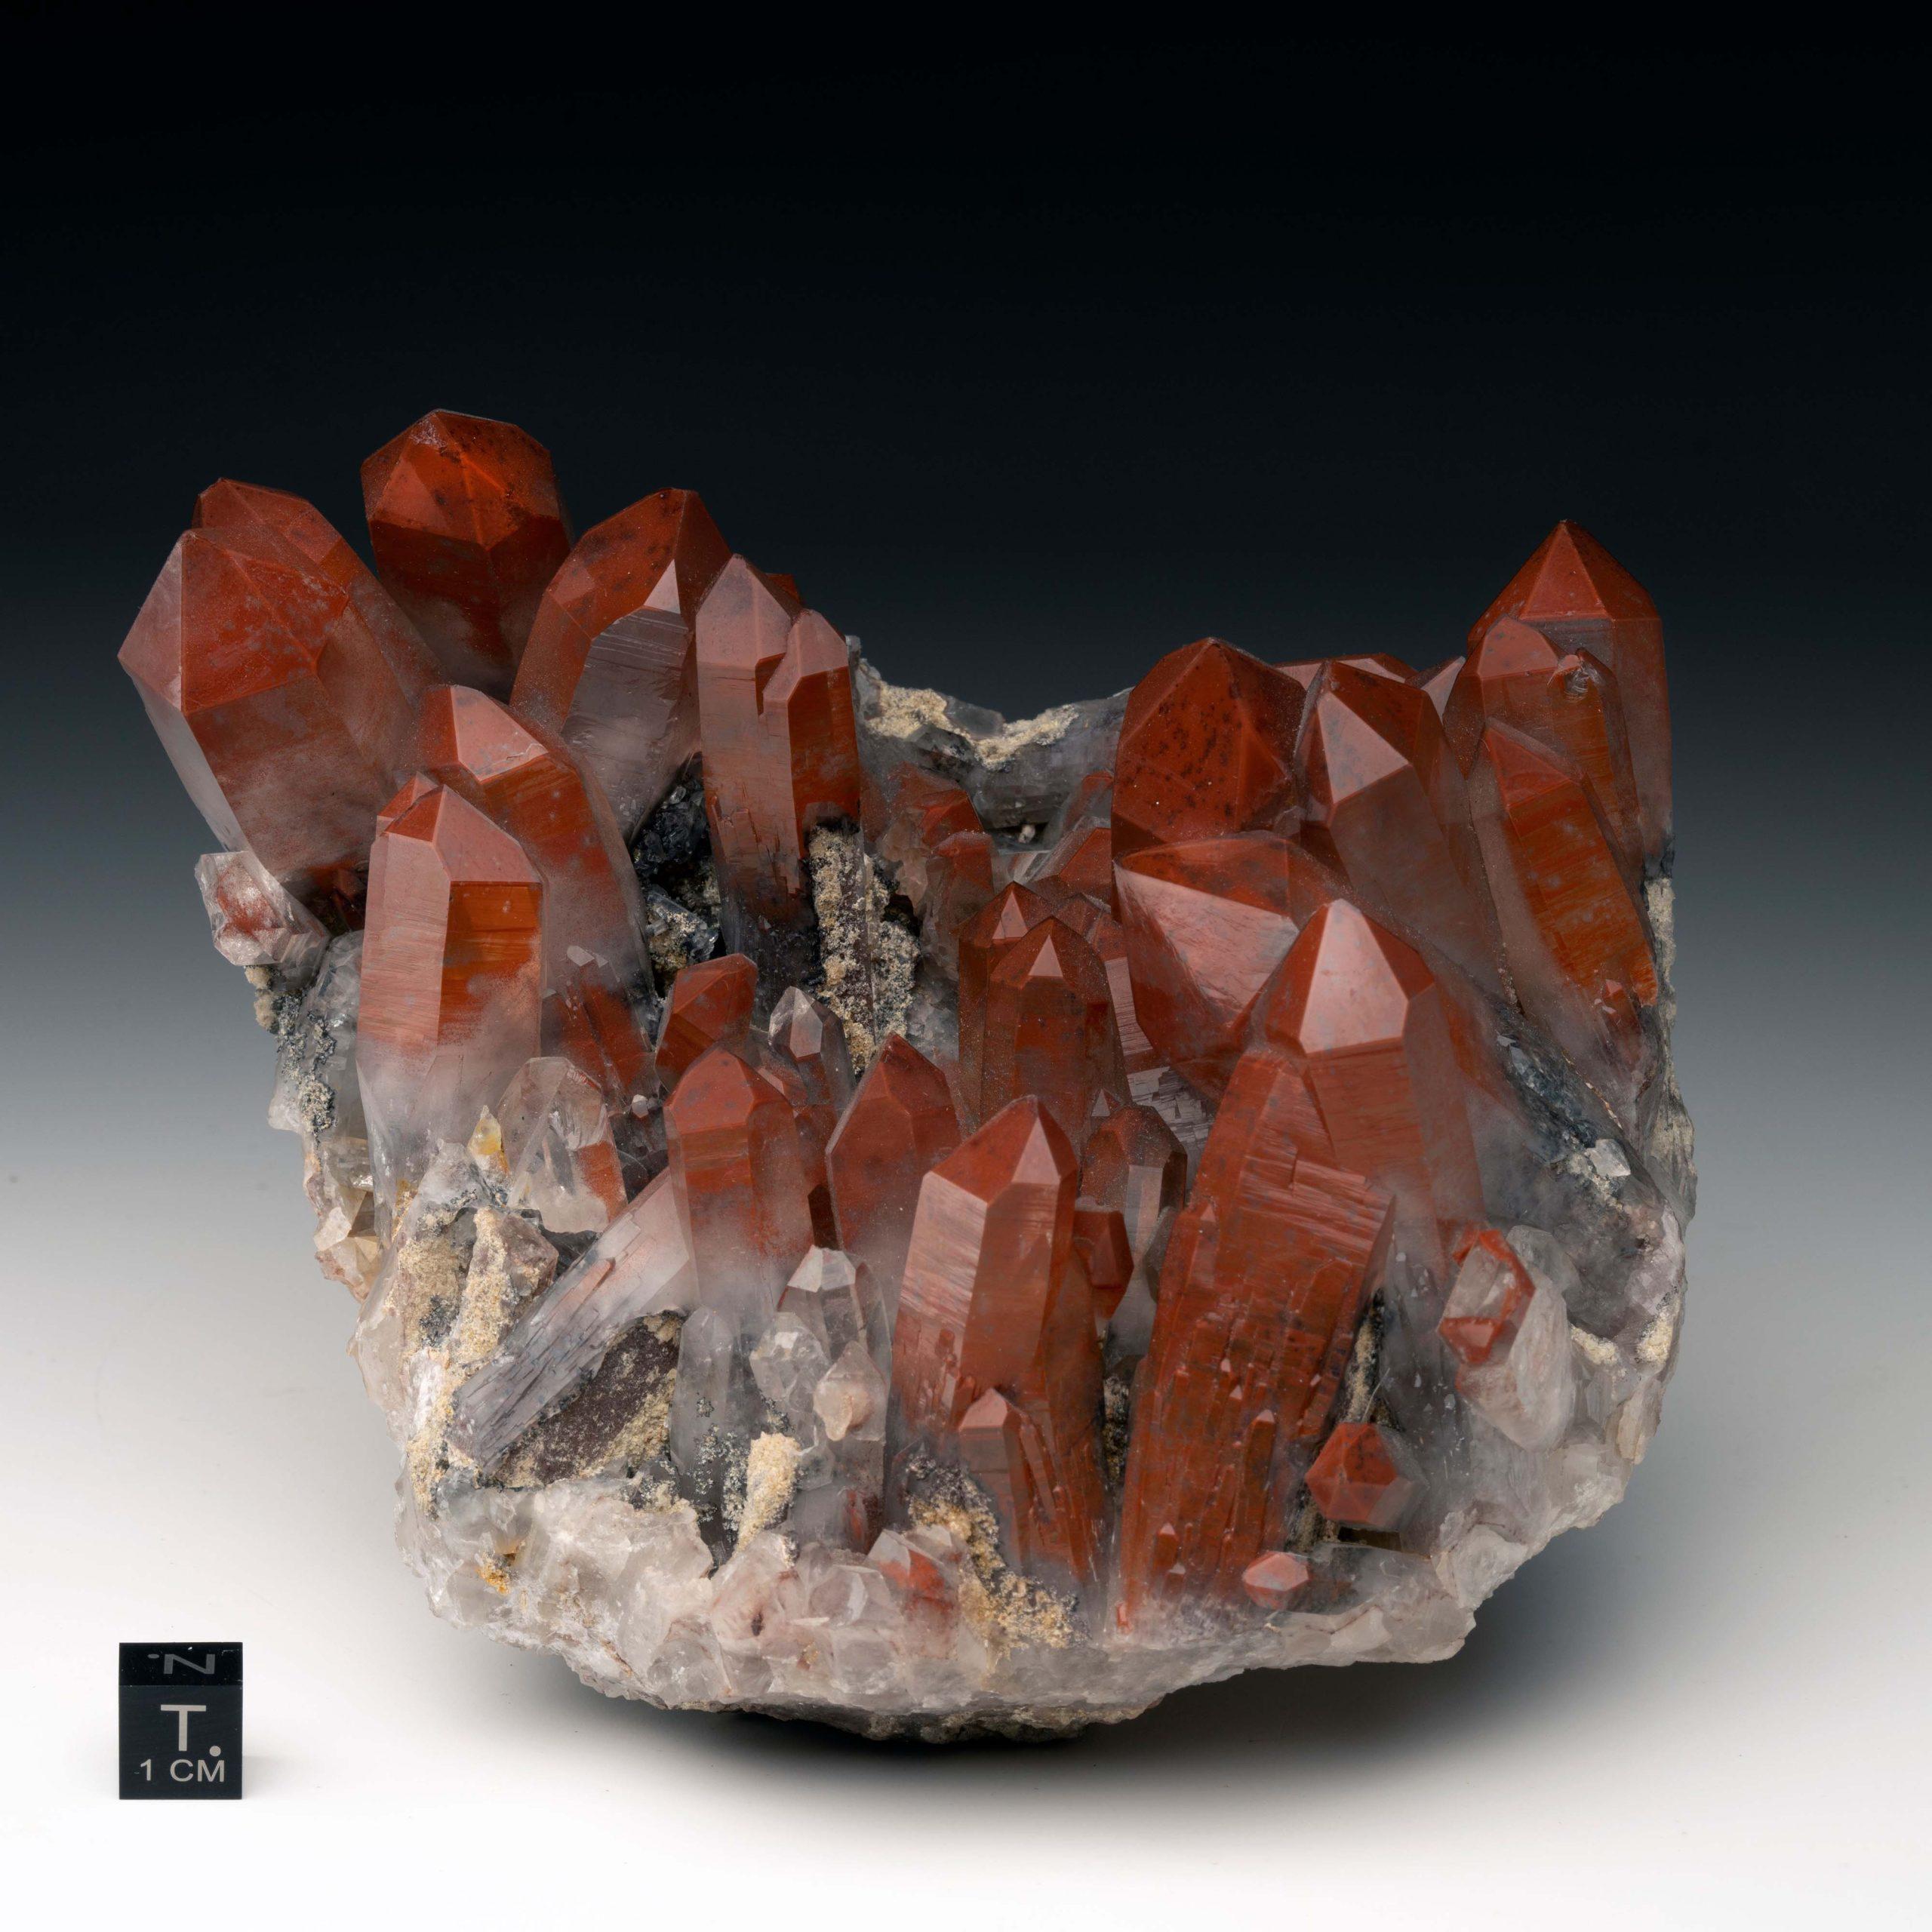 Orange River, Namibia

This sizable red quartz cluster owes its rare fire red coloring to hematite inclusions which are covered with clear translucent quartz. There are multiple hematite phantoms scattered throughout this piece. This specimen